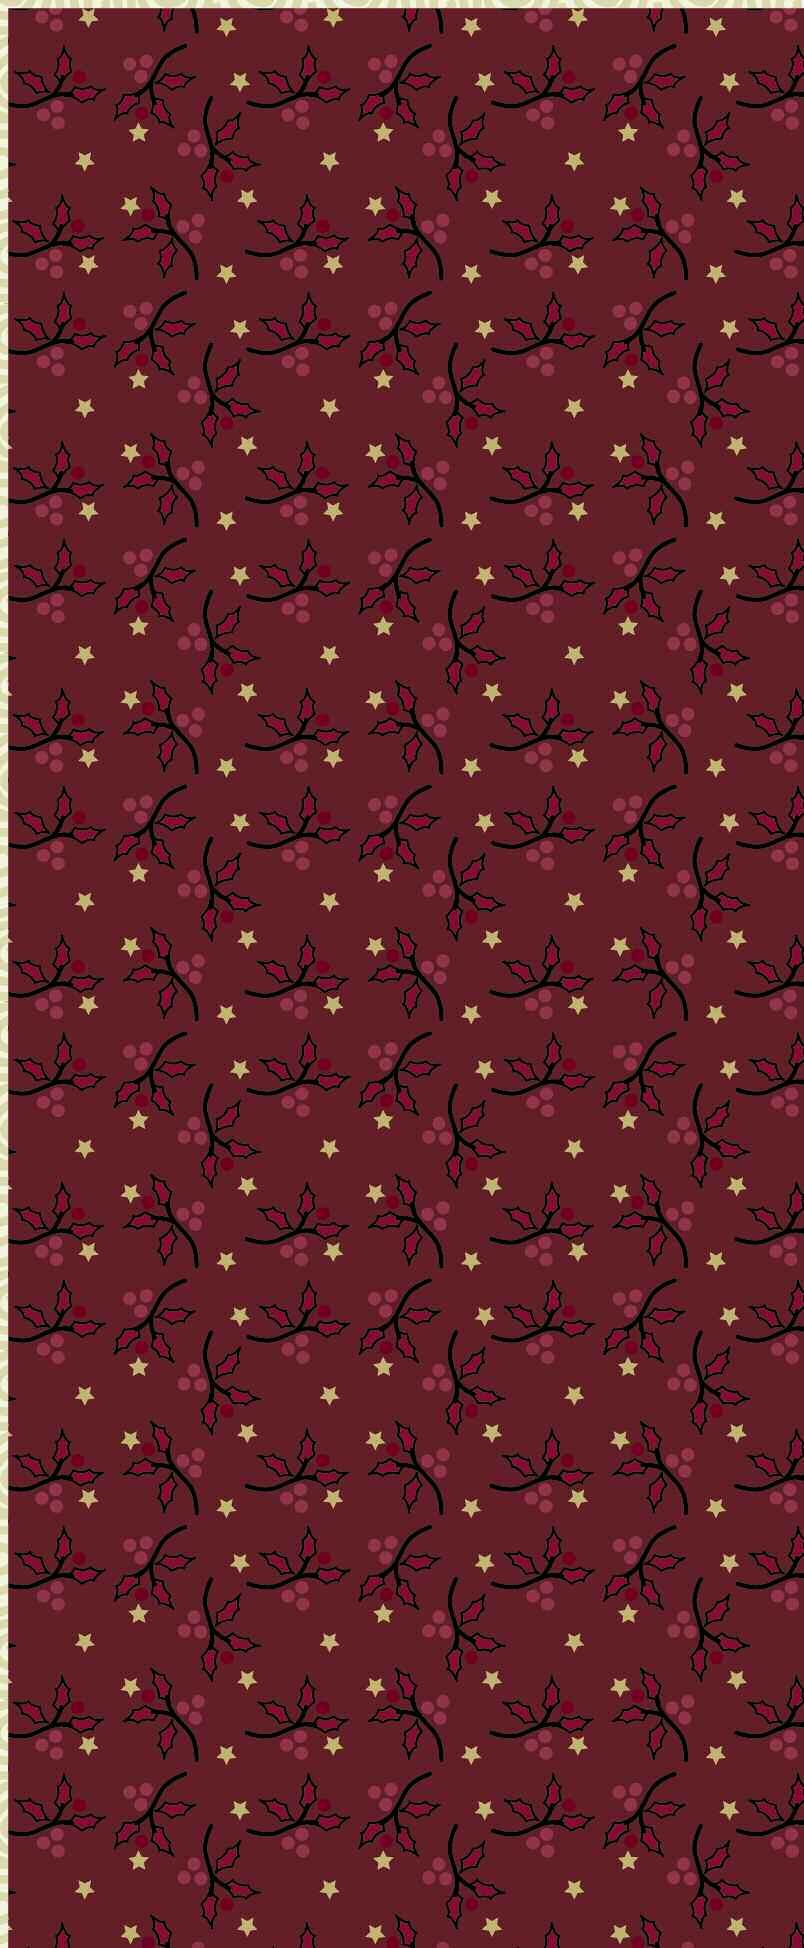 yard RED PRINT for binding 2-2/3 yards backing fabric quilt batting, at